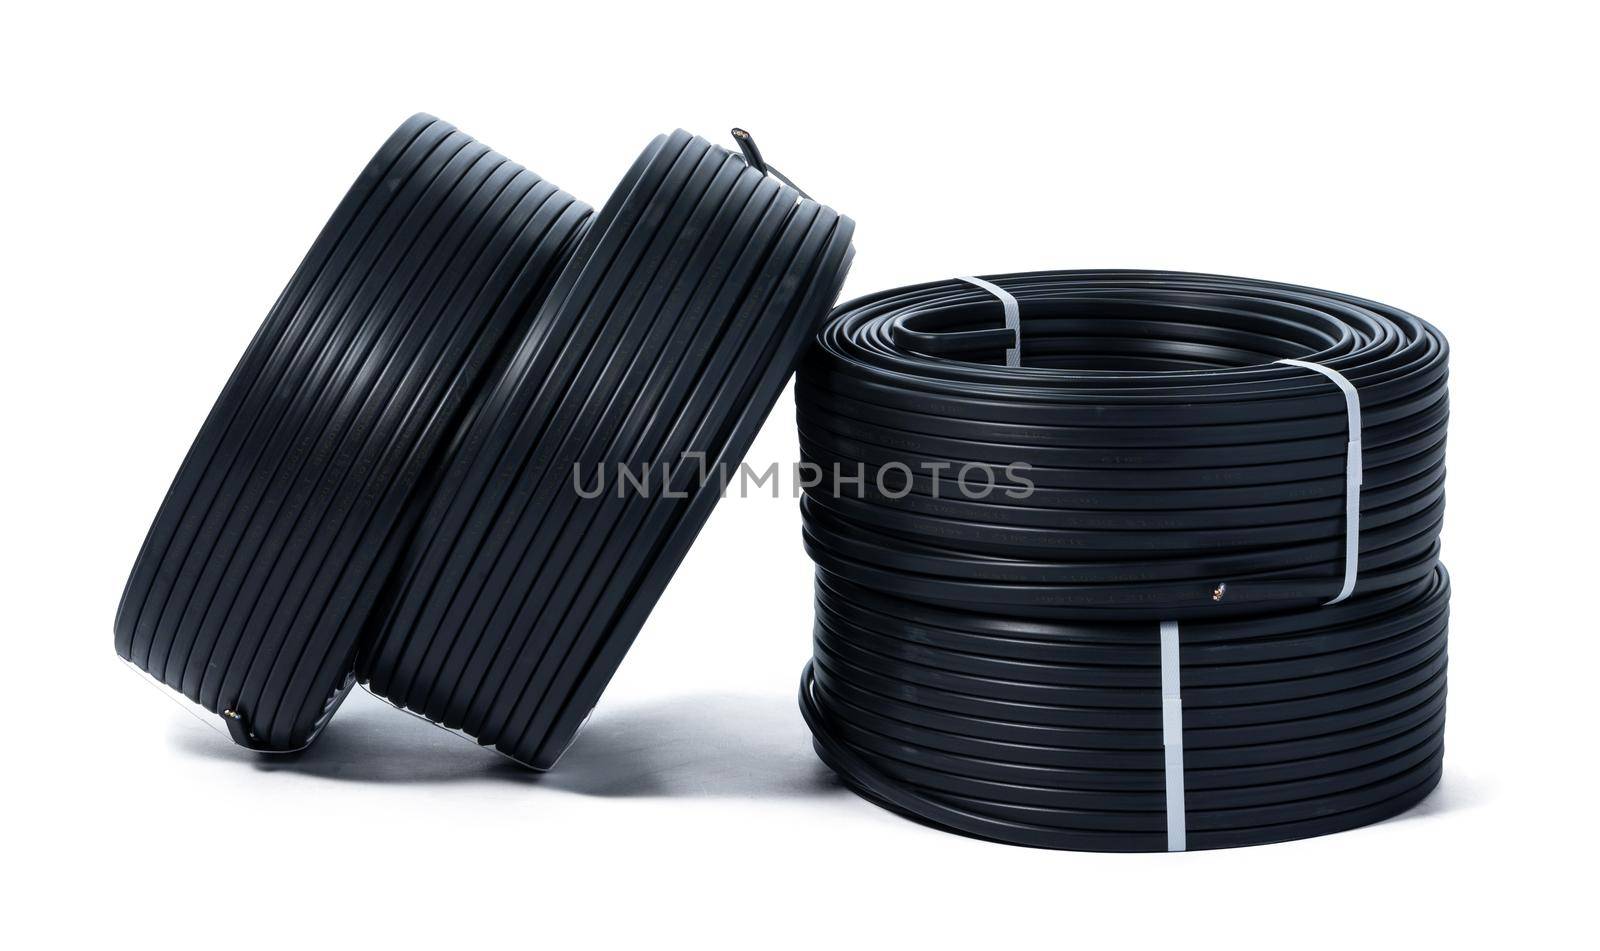 Coils of black cable isolated on white background. Close up.